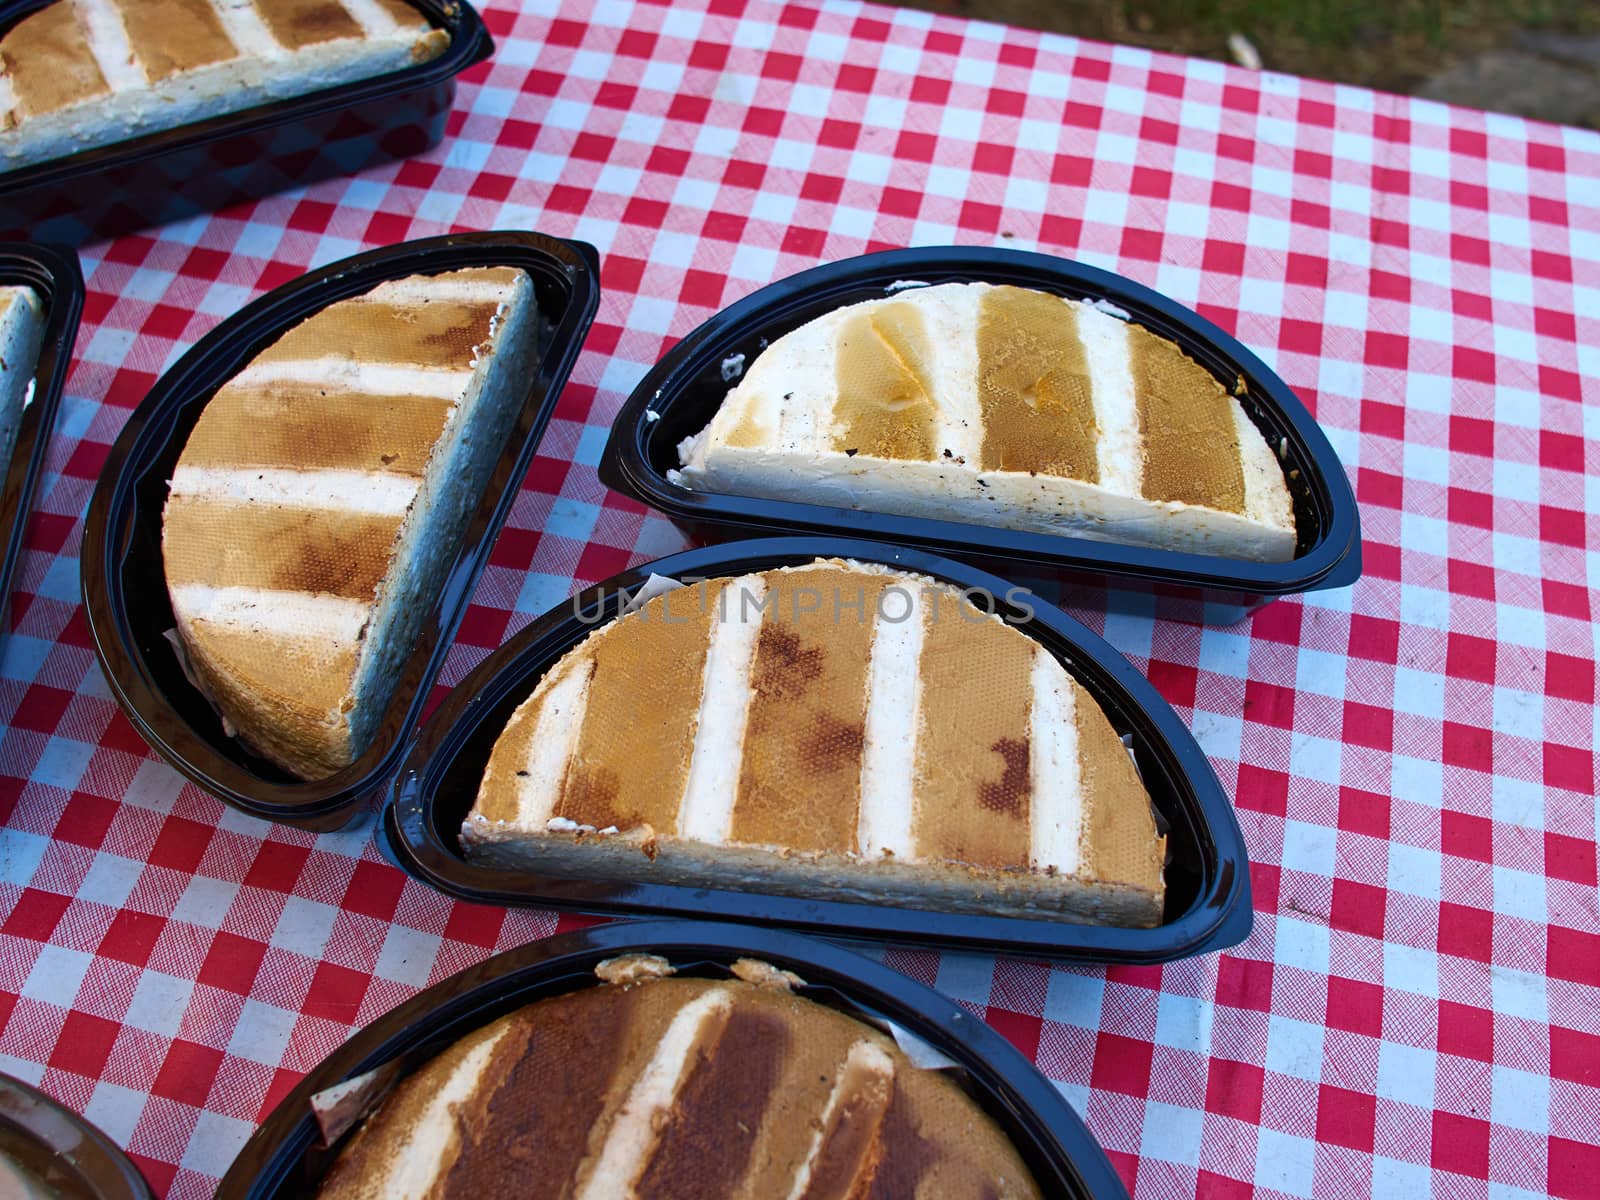 Typical traditional Danish smoked white cheese in a food market